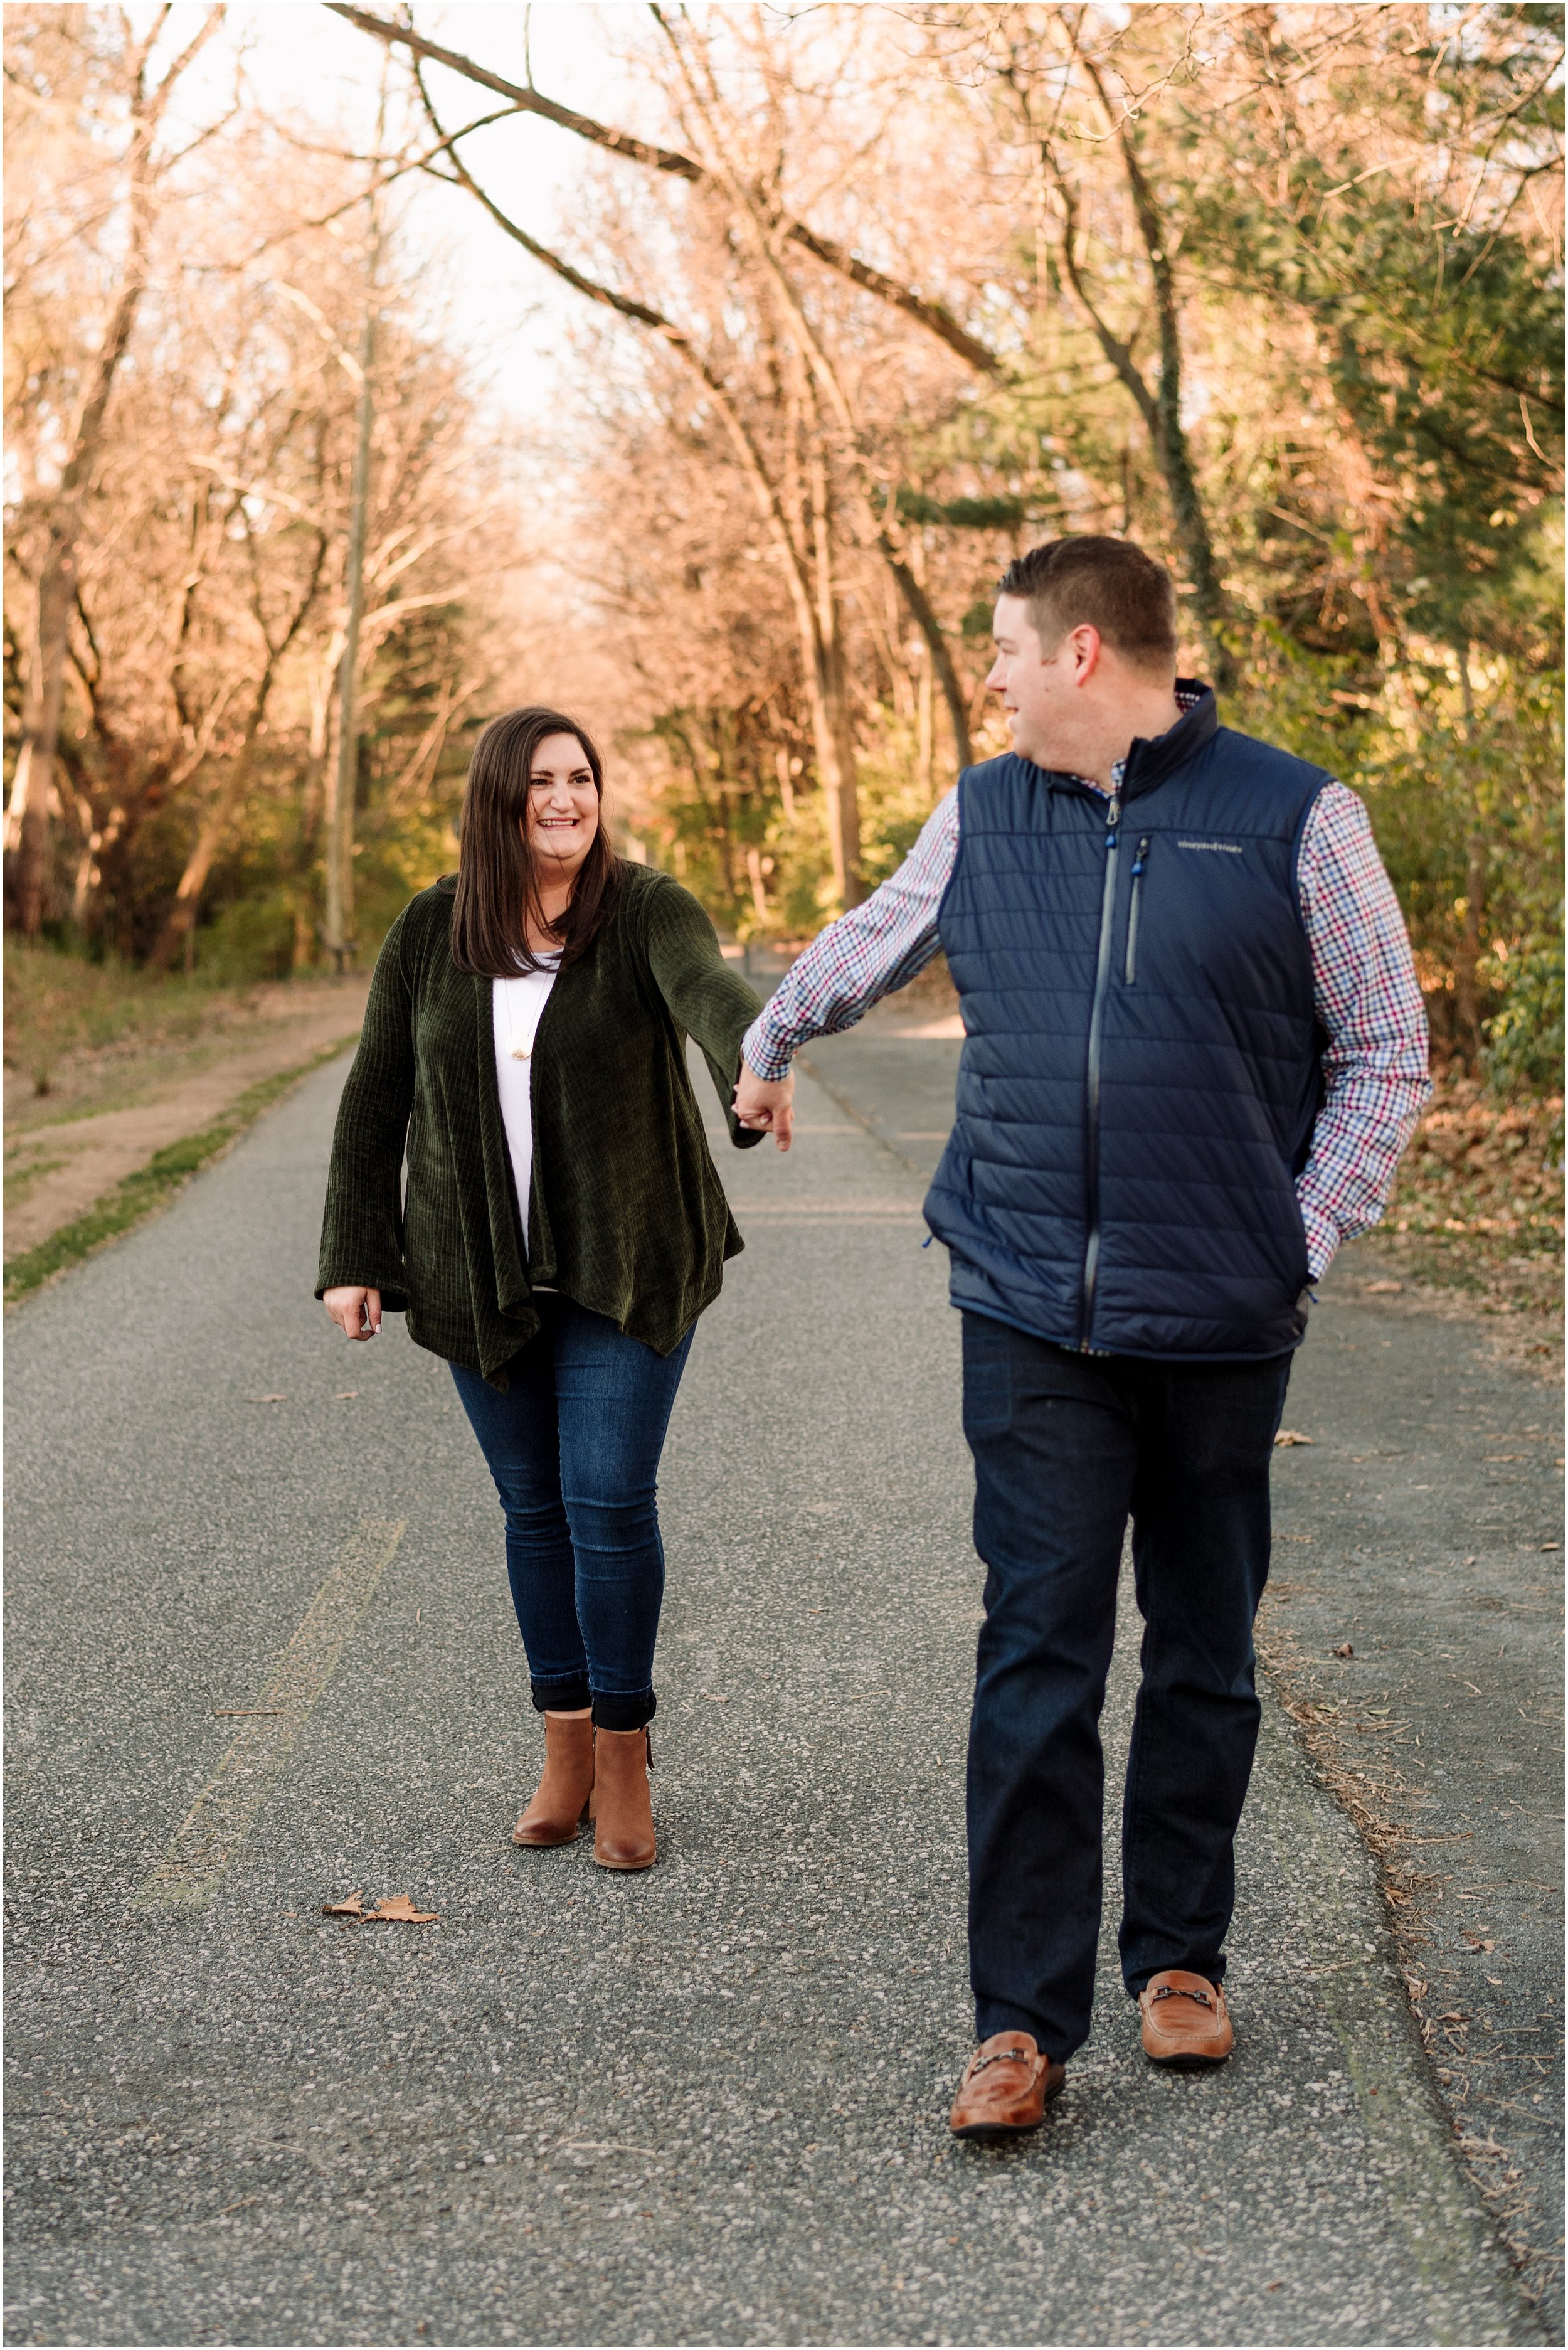 hannah leigh photography Engagement Session Bethesda MD_2546.jpg